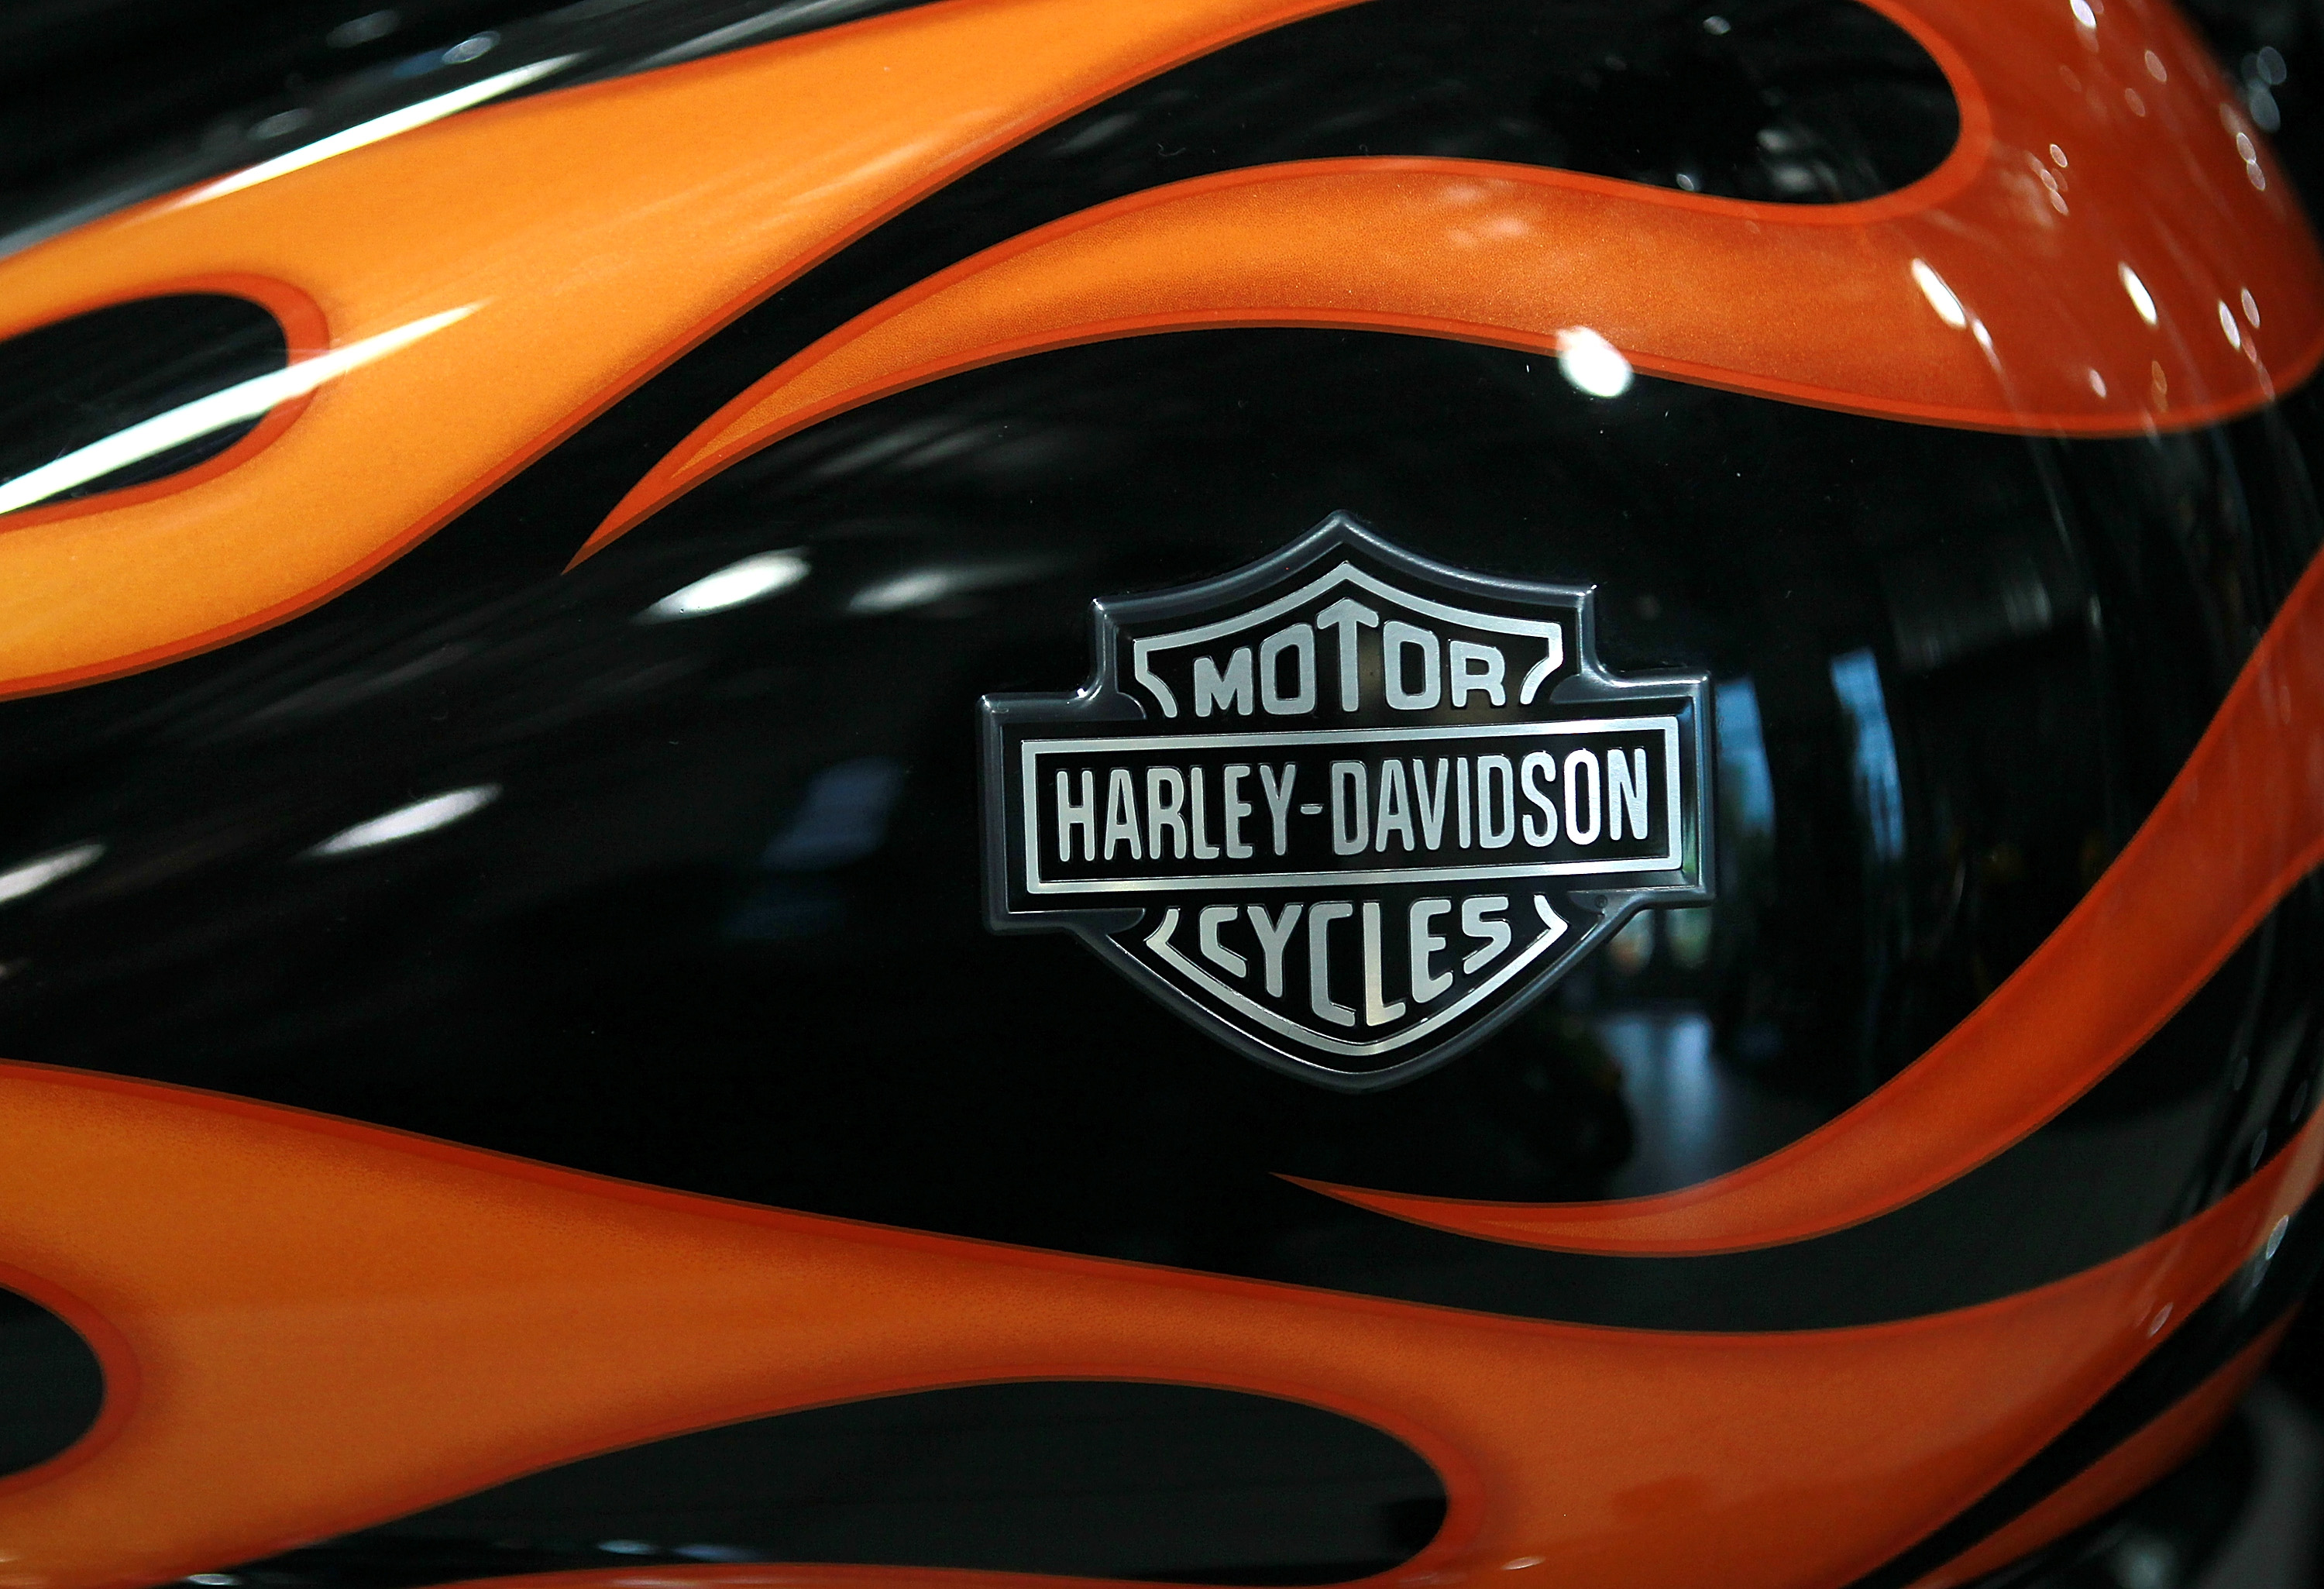 The Harley-Davidson logo is seen on the gas tank of a new motorcycle at Oakland Harley-Davidson on July 19, 2011 in Oakland, California.  Motorcycle maker Harley-Davidson reported an unexpected rise in second quarter profits and their first U.S. sales increase sonce 2006 with earnings of $190.6 million, or 81 cents per share, compared to $71.2 million, or 30 cents per share, one year ago.  (Photo by Justin Sullivan/Getty Images)